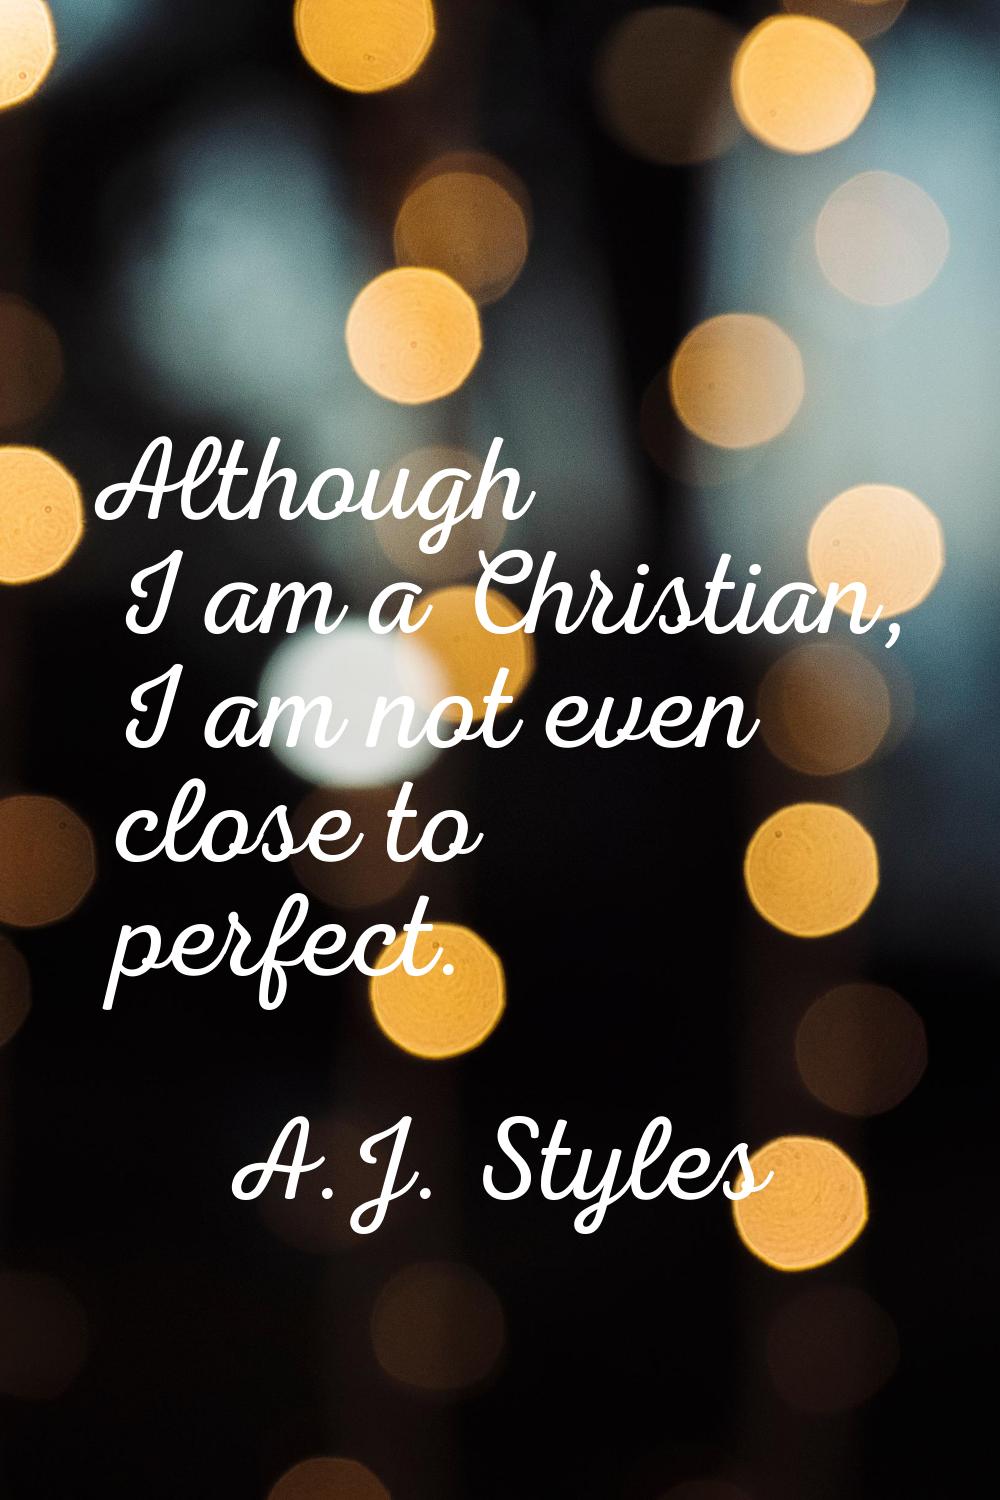 Although I am a Christian, I am not even close to perfect.